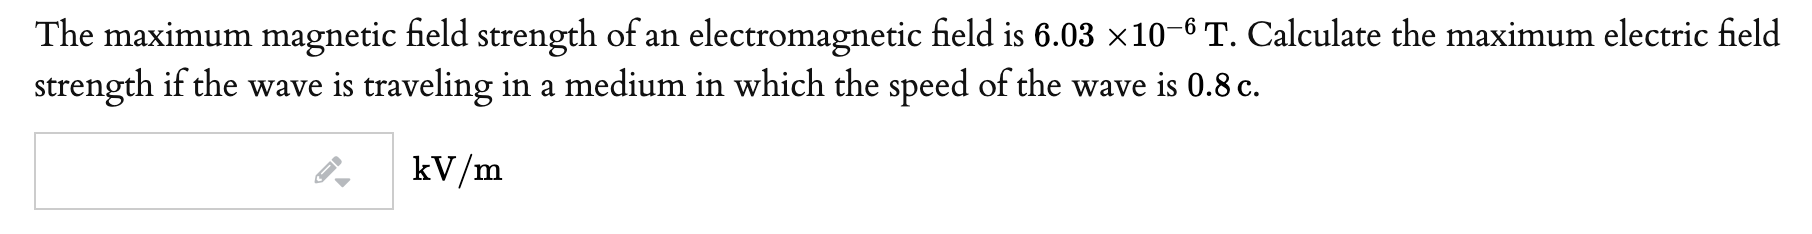 The maximum magnetic field strength of an electromagnetic field is 6.03 ×10-6 T. Calculate the maximum electric field
strength if the wave is traveling in a medium in which the speed of the wave is 0.8 c.
